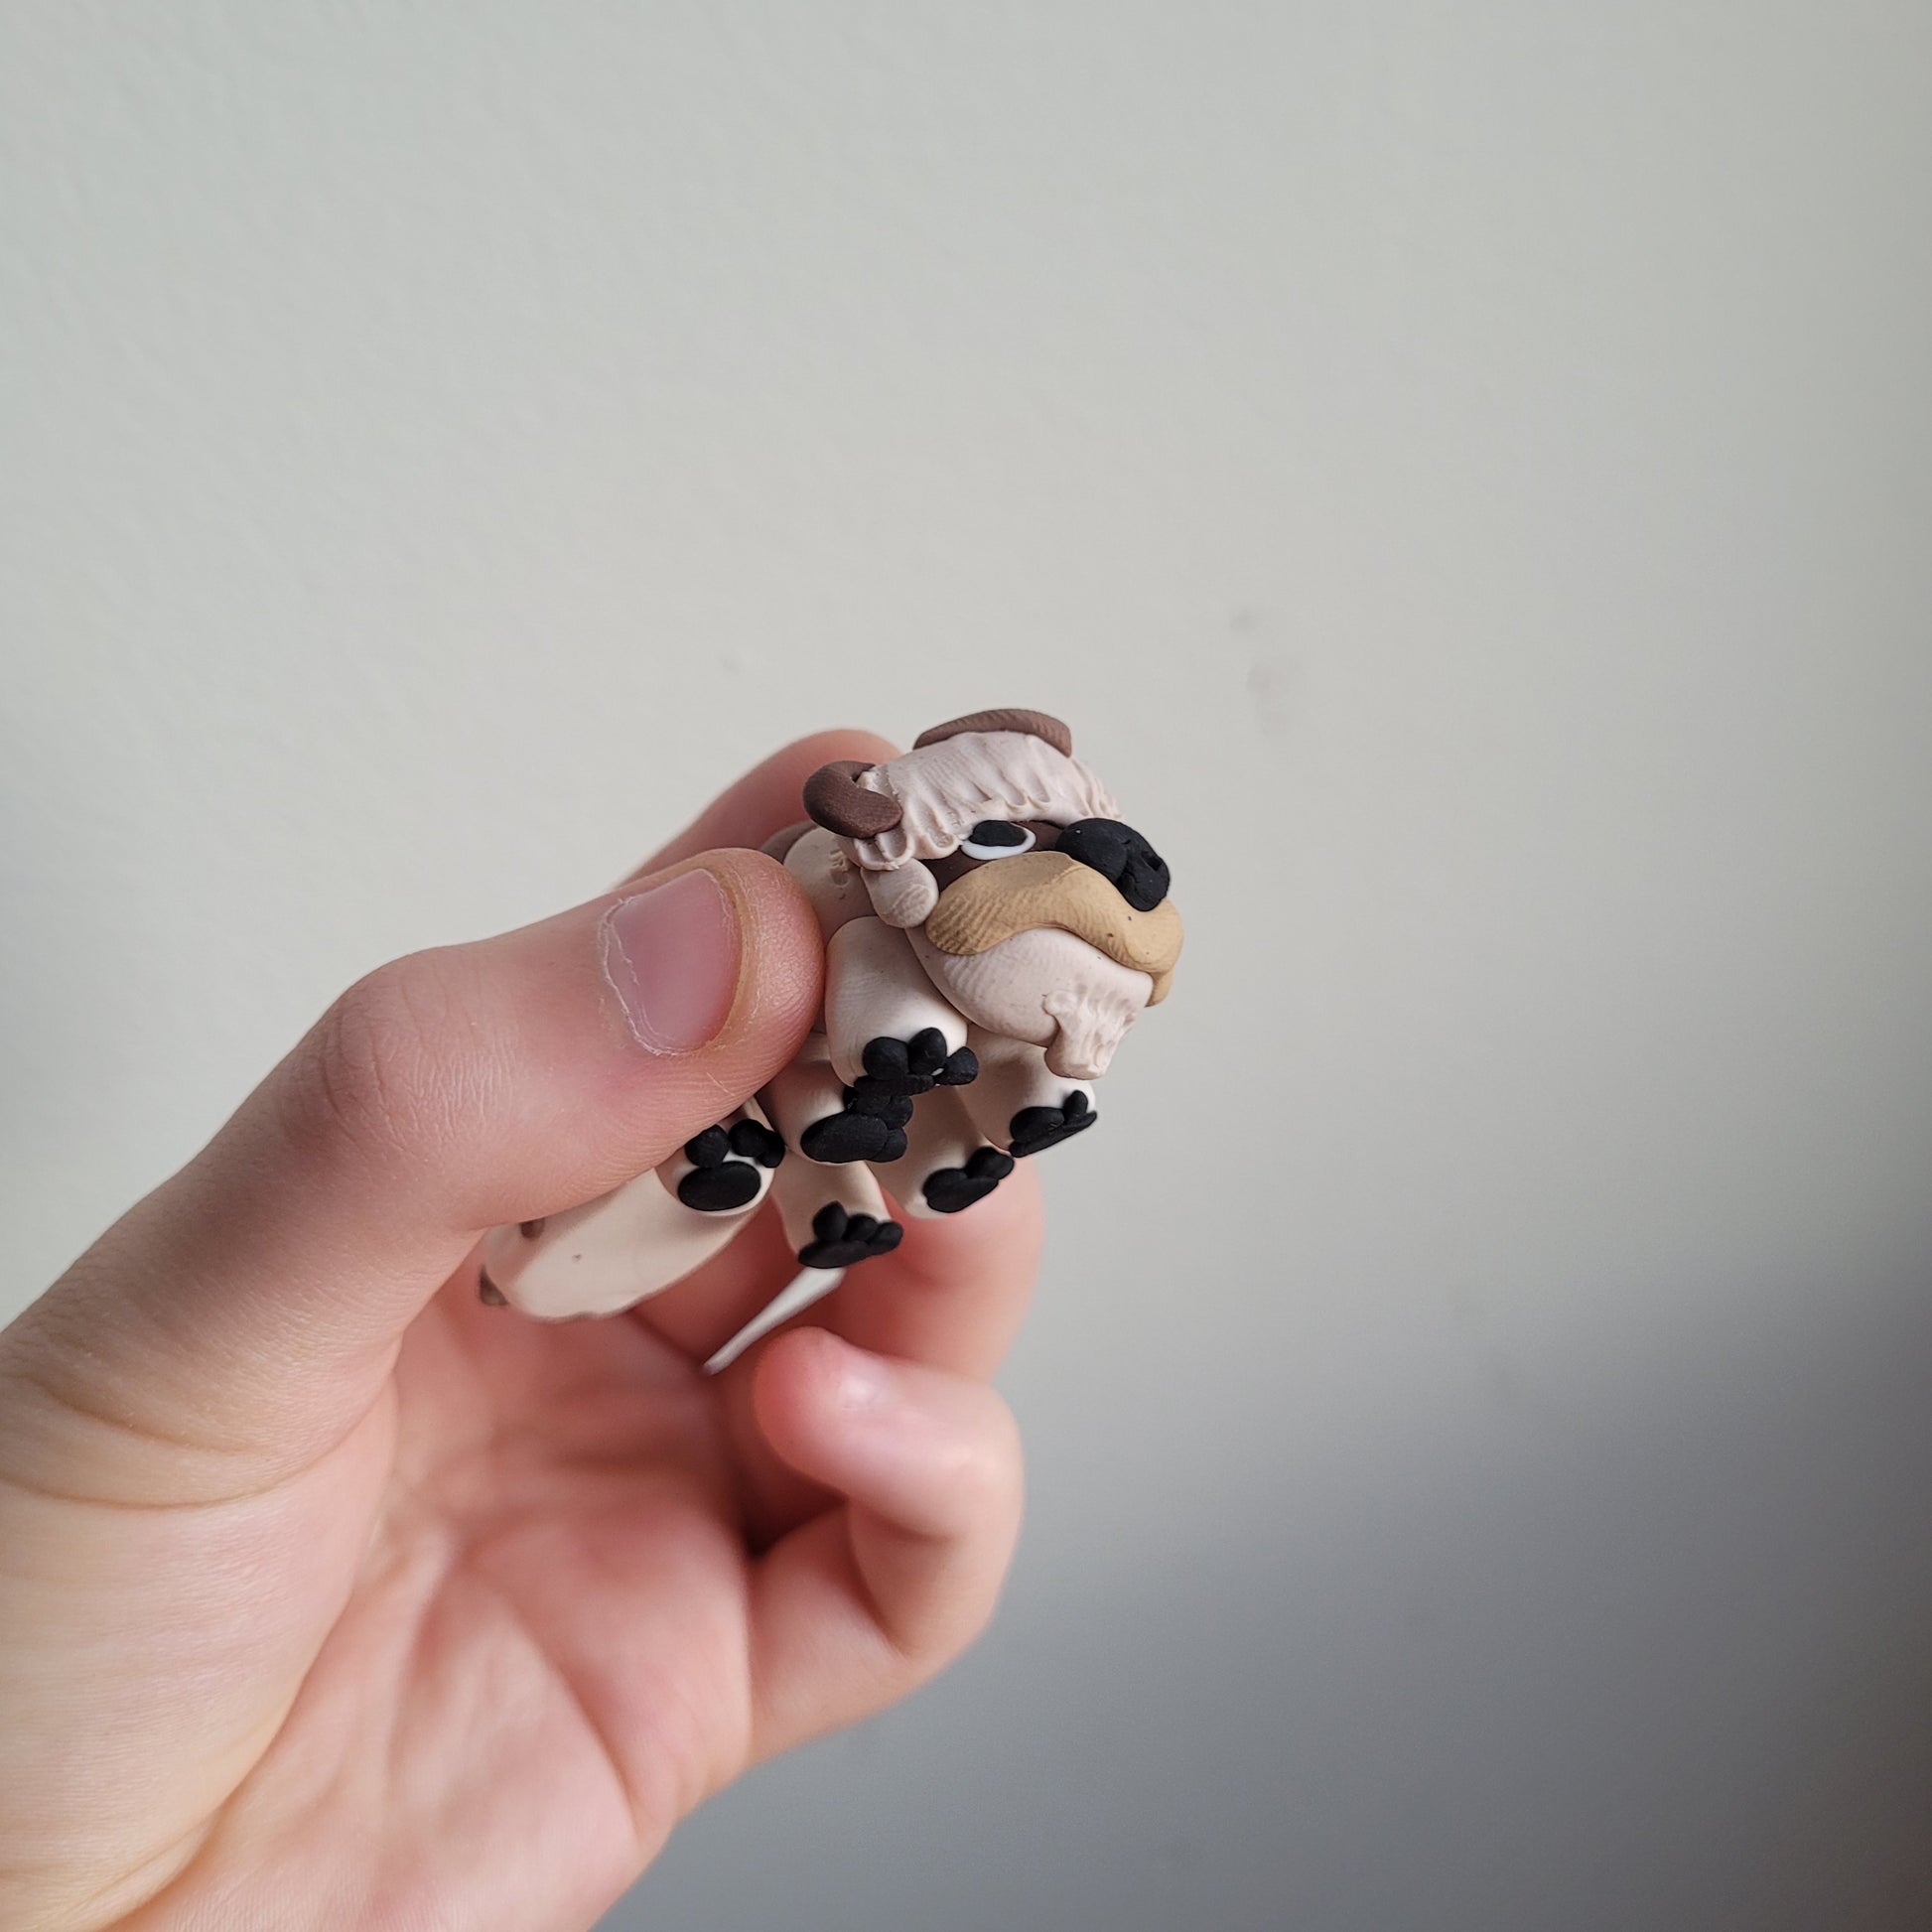 An angled view of the Appa figurine. The collectible Appa the flying bison figurine from the Avatar: The Last Airbender cartoon.